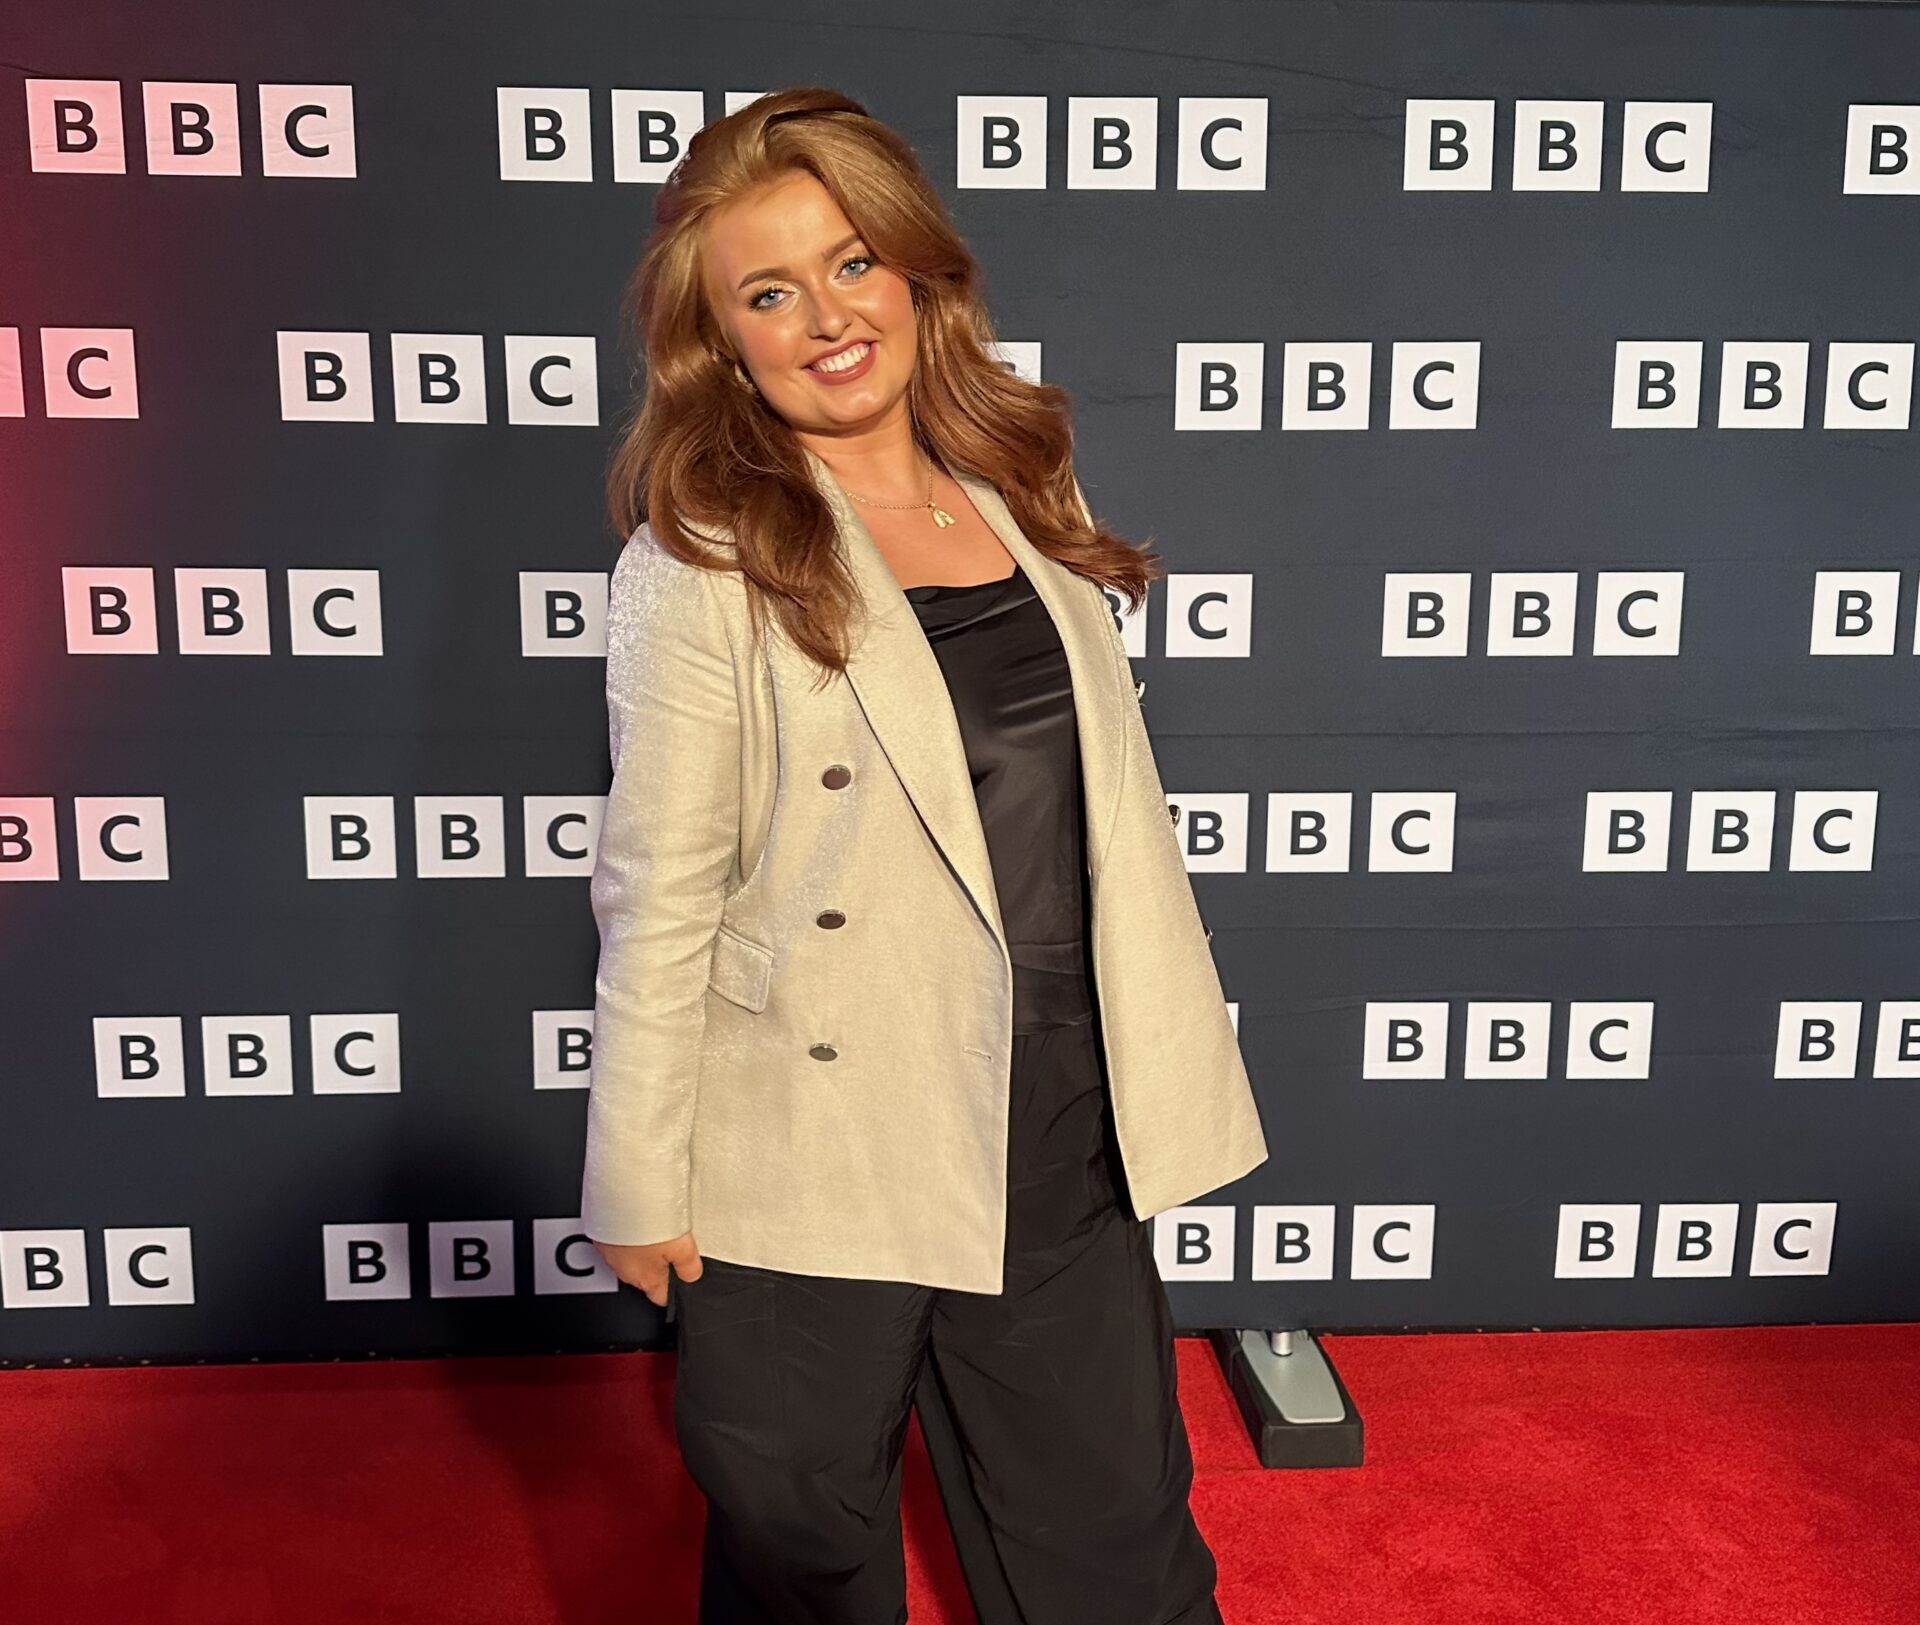 Alexa Williams stands on the BBC Red Carpet at a premiere